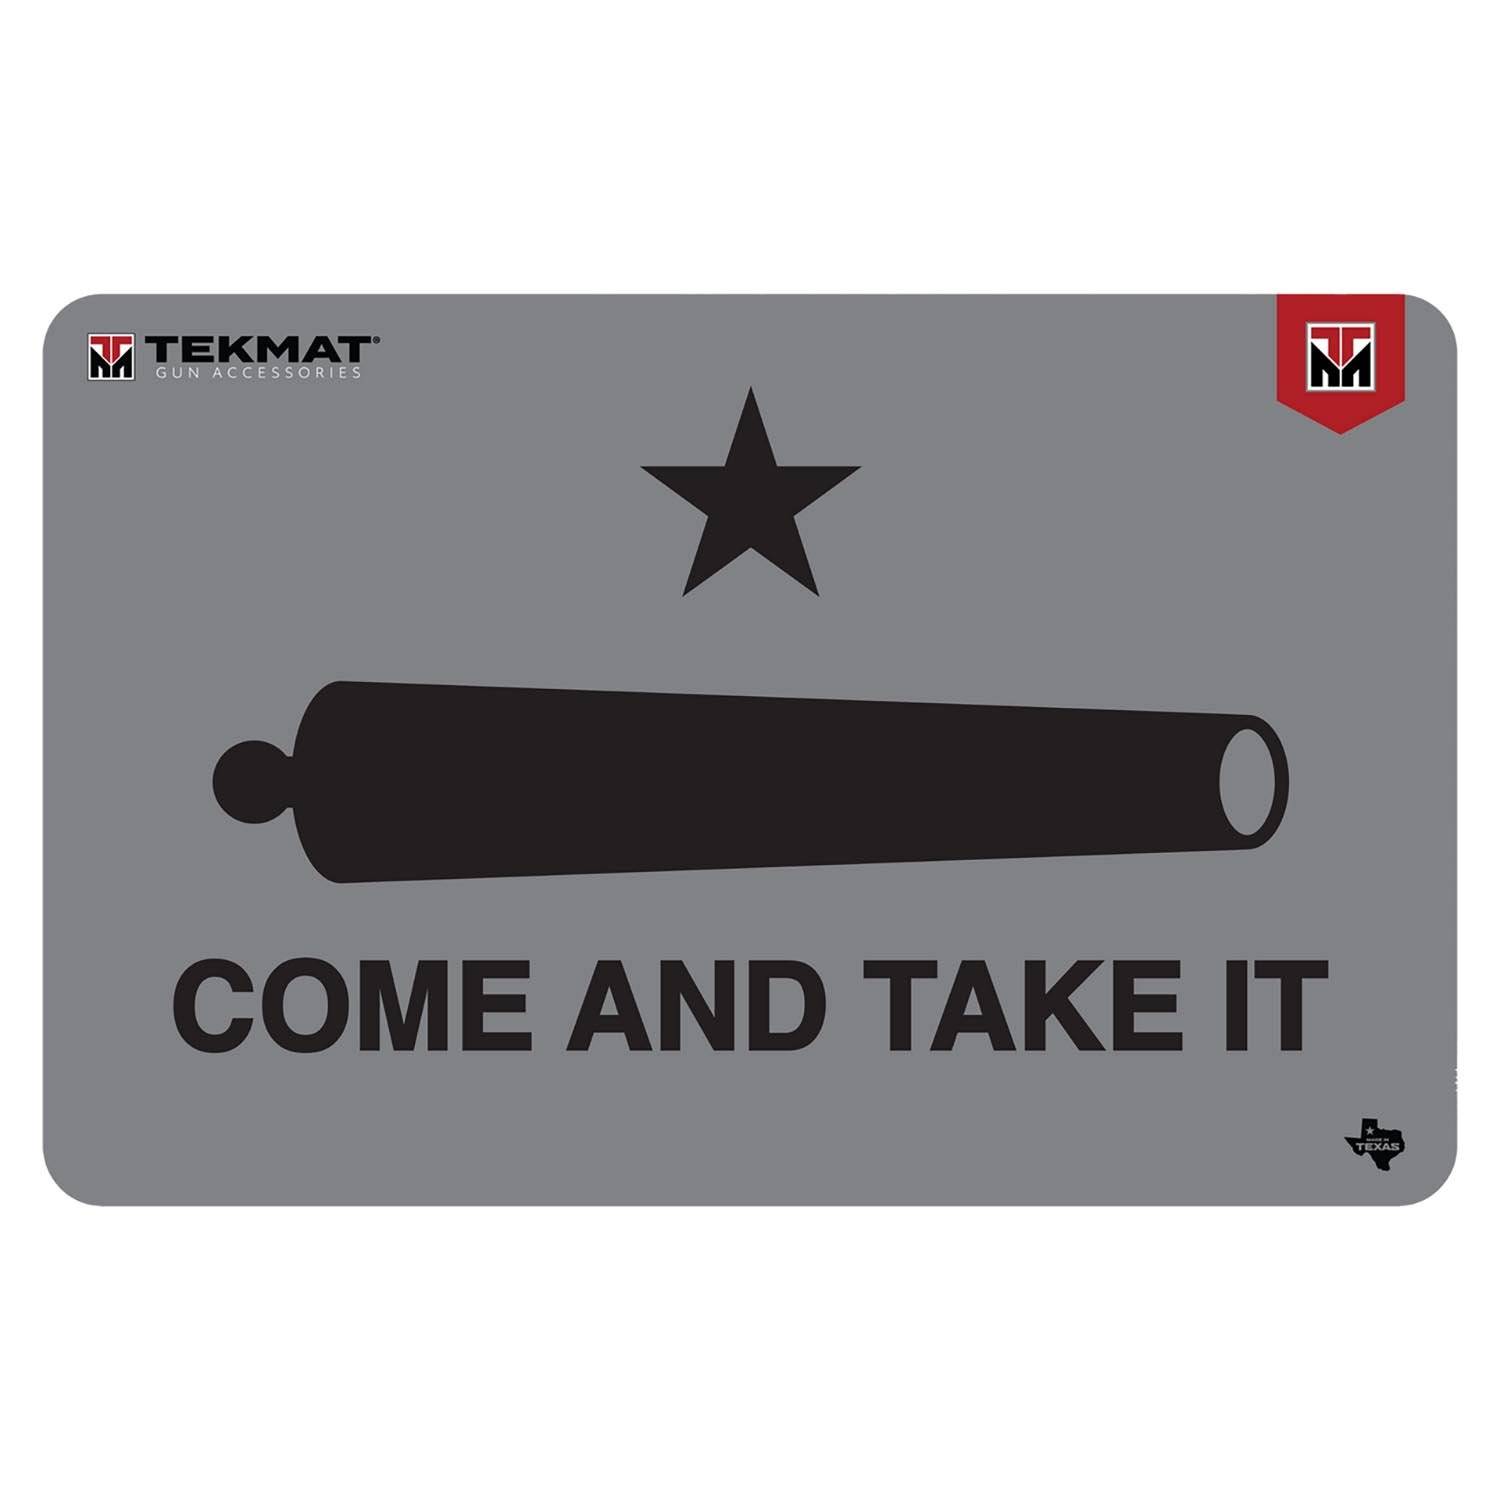 TekMat Come and Take It Cannon Mat 17"